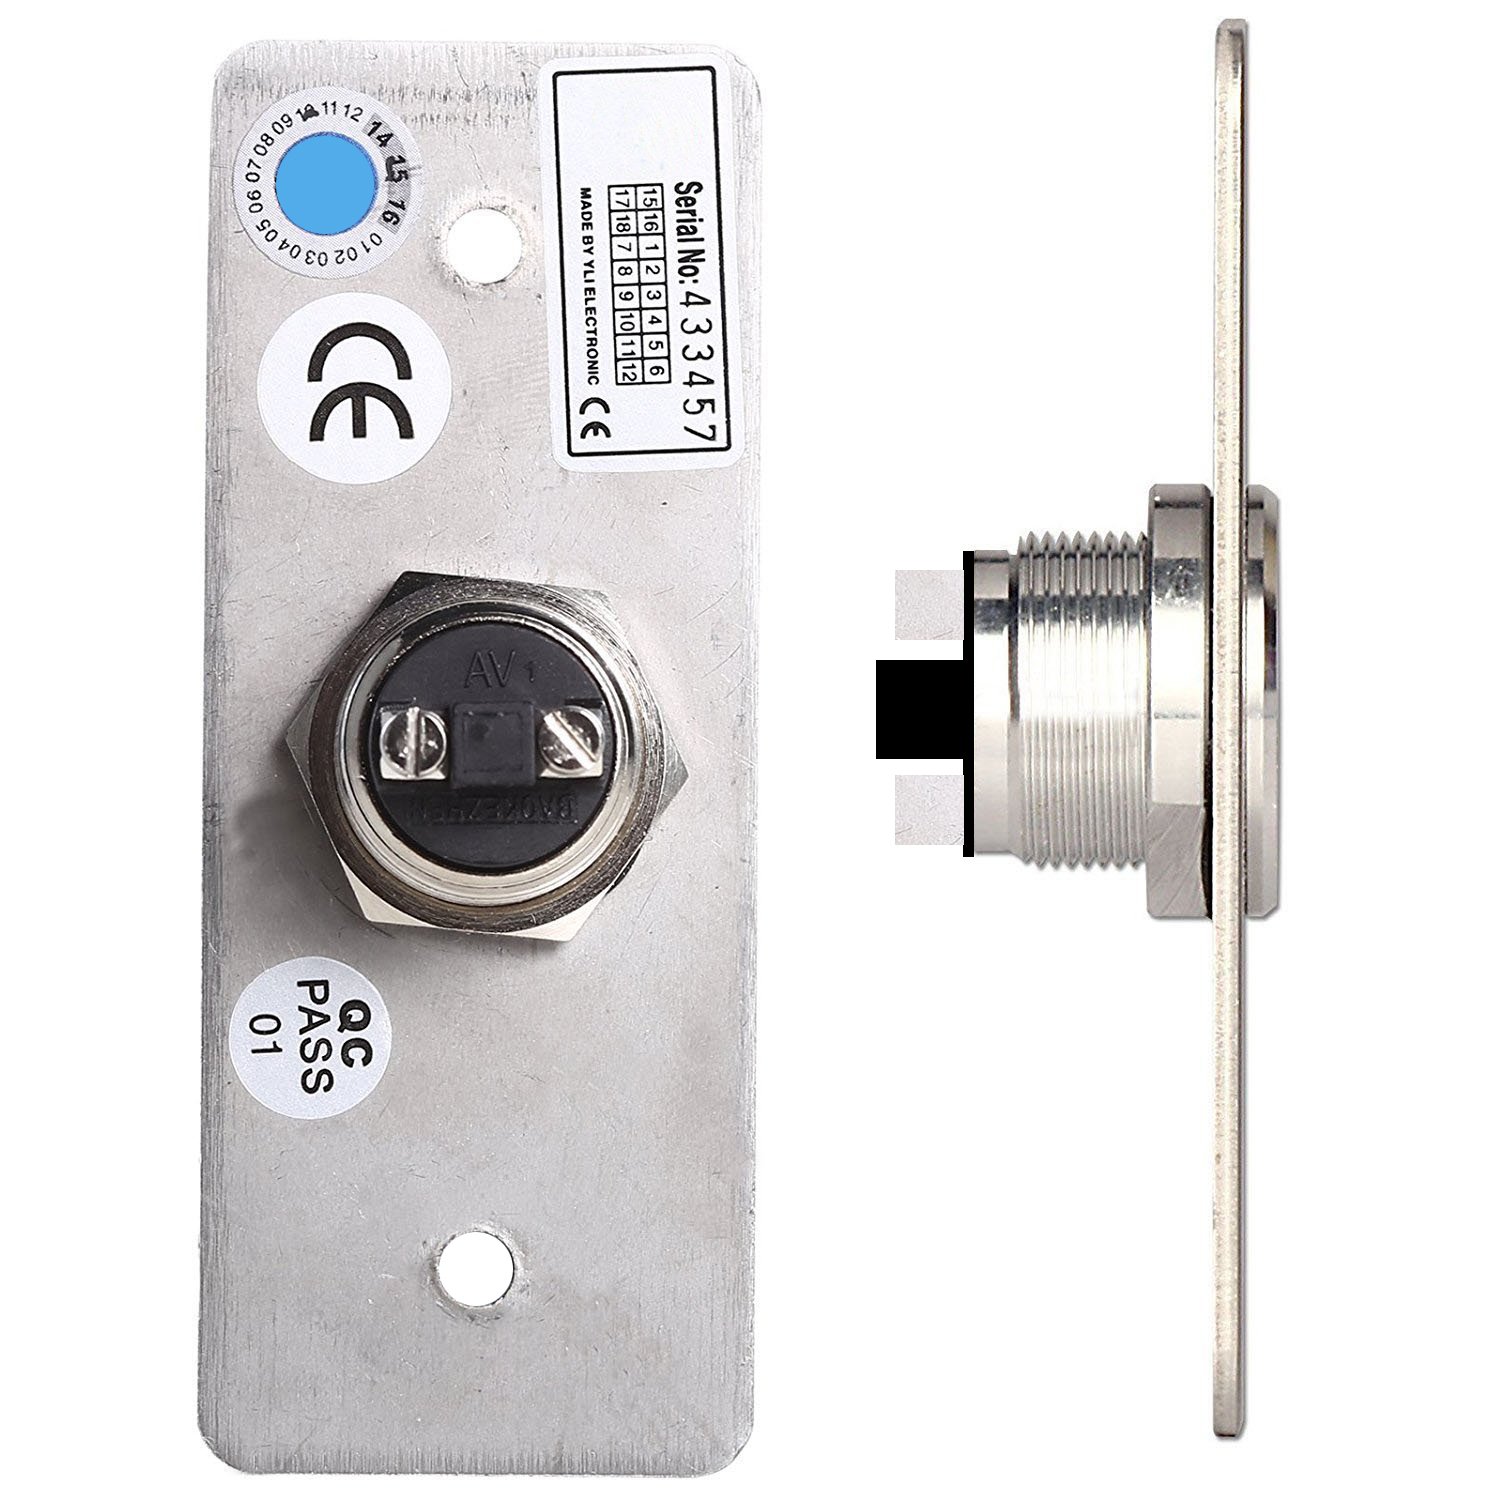 UHPPOTE Momentary Push to Exit Button Switch NO/COM Output Stainless Steel Panel for Access Control Hollow Door